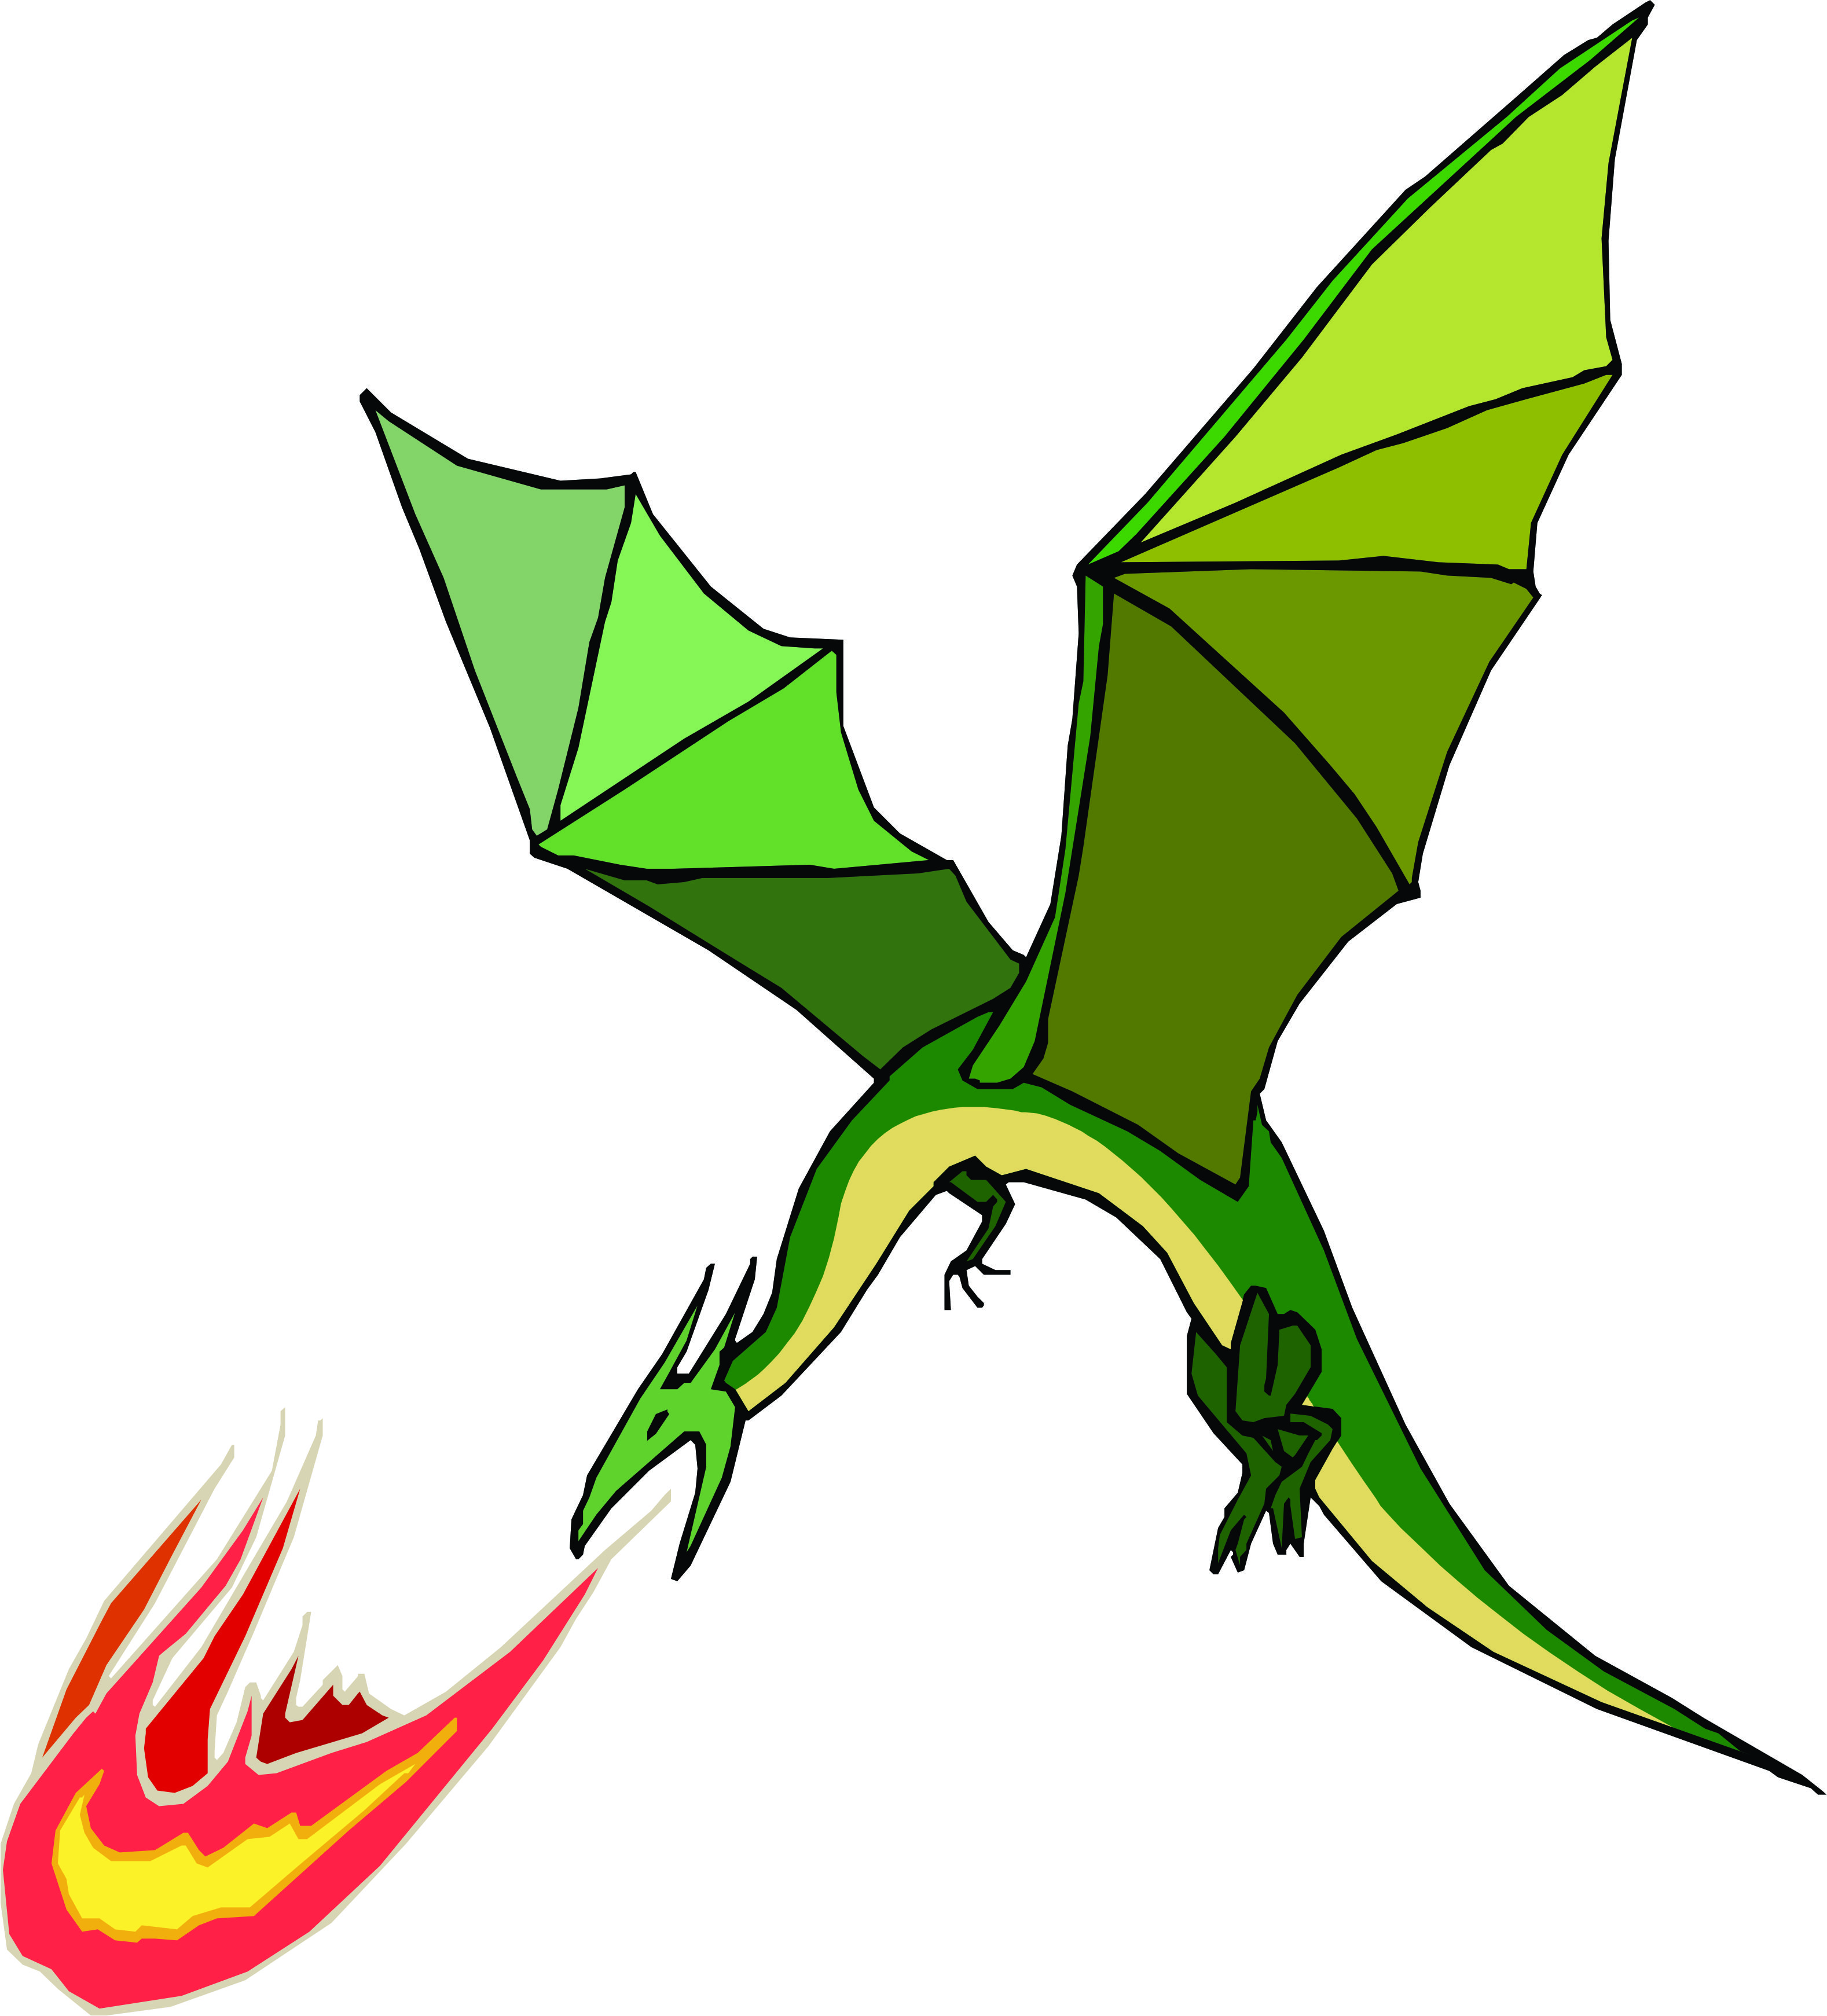 Animated Dragon Pictures - ClipArt Best